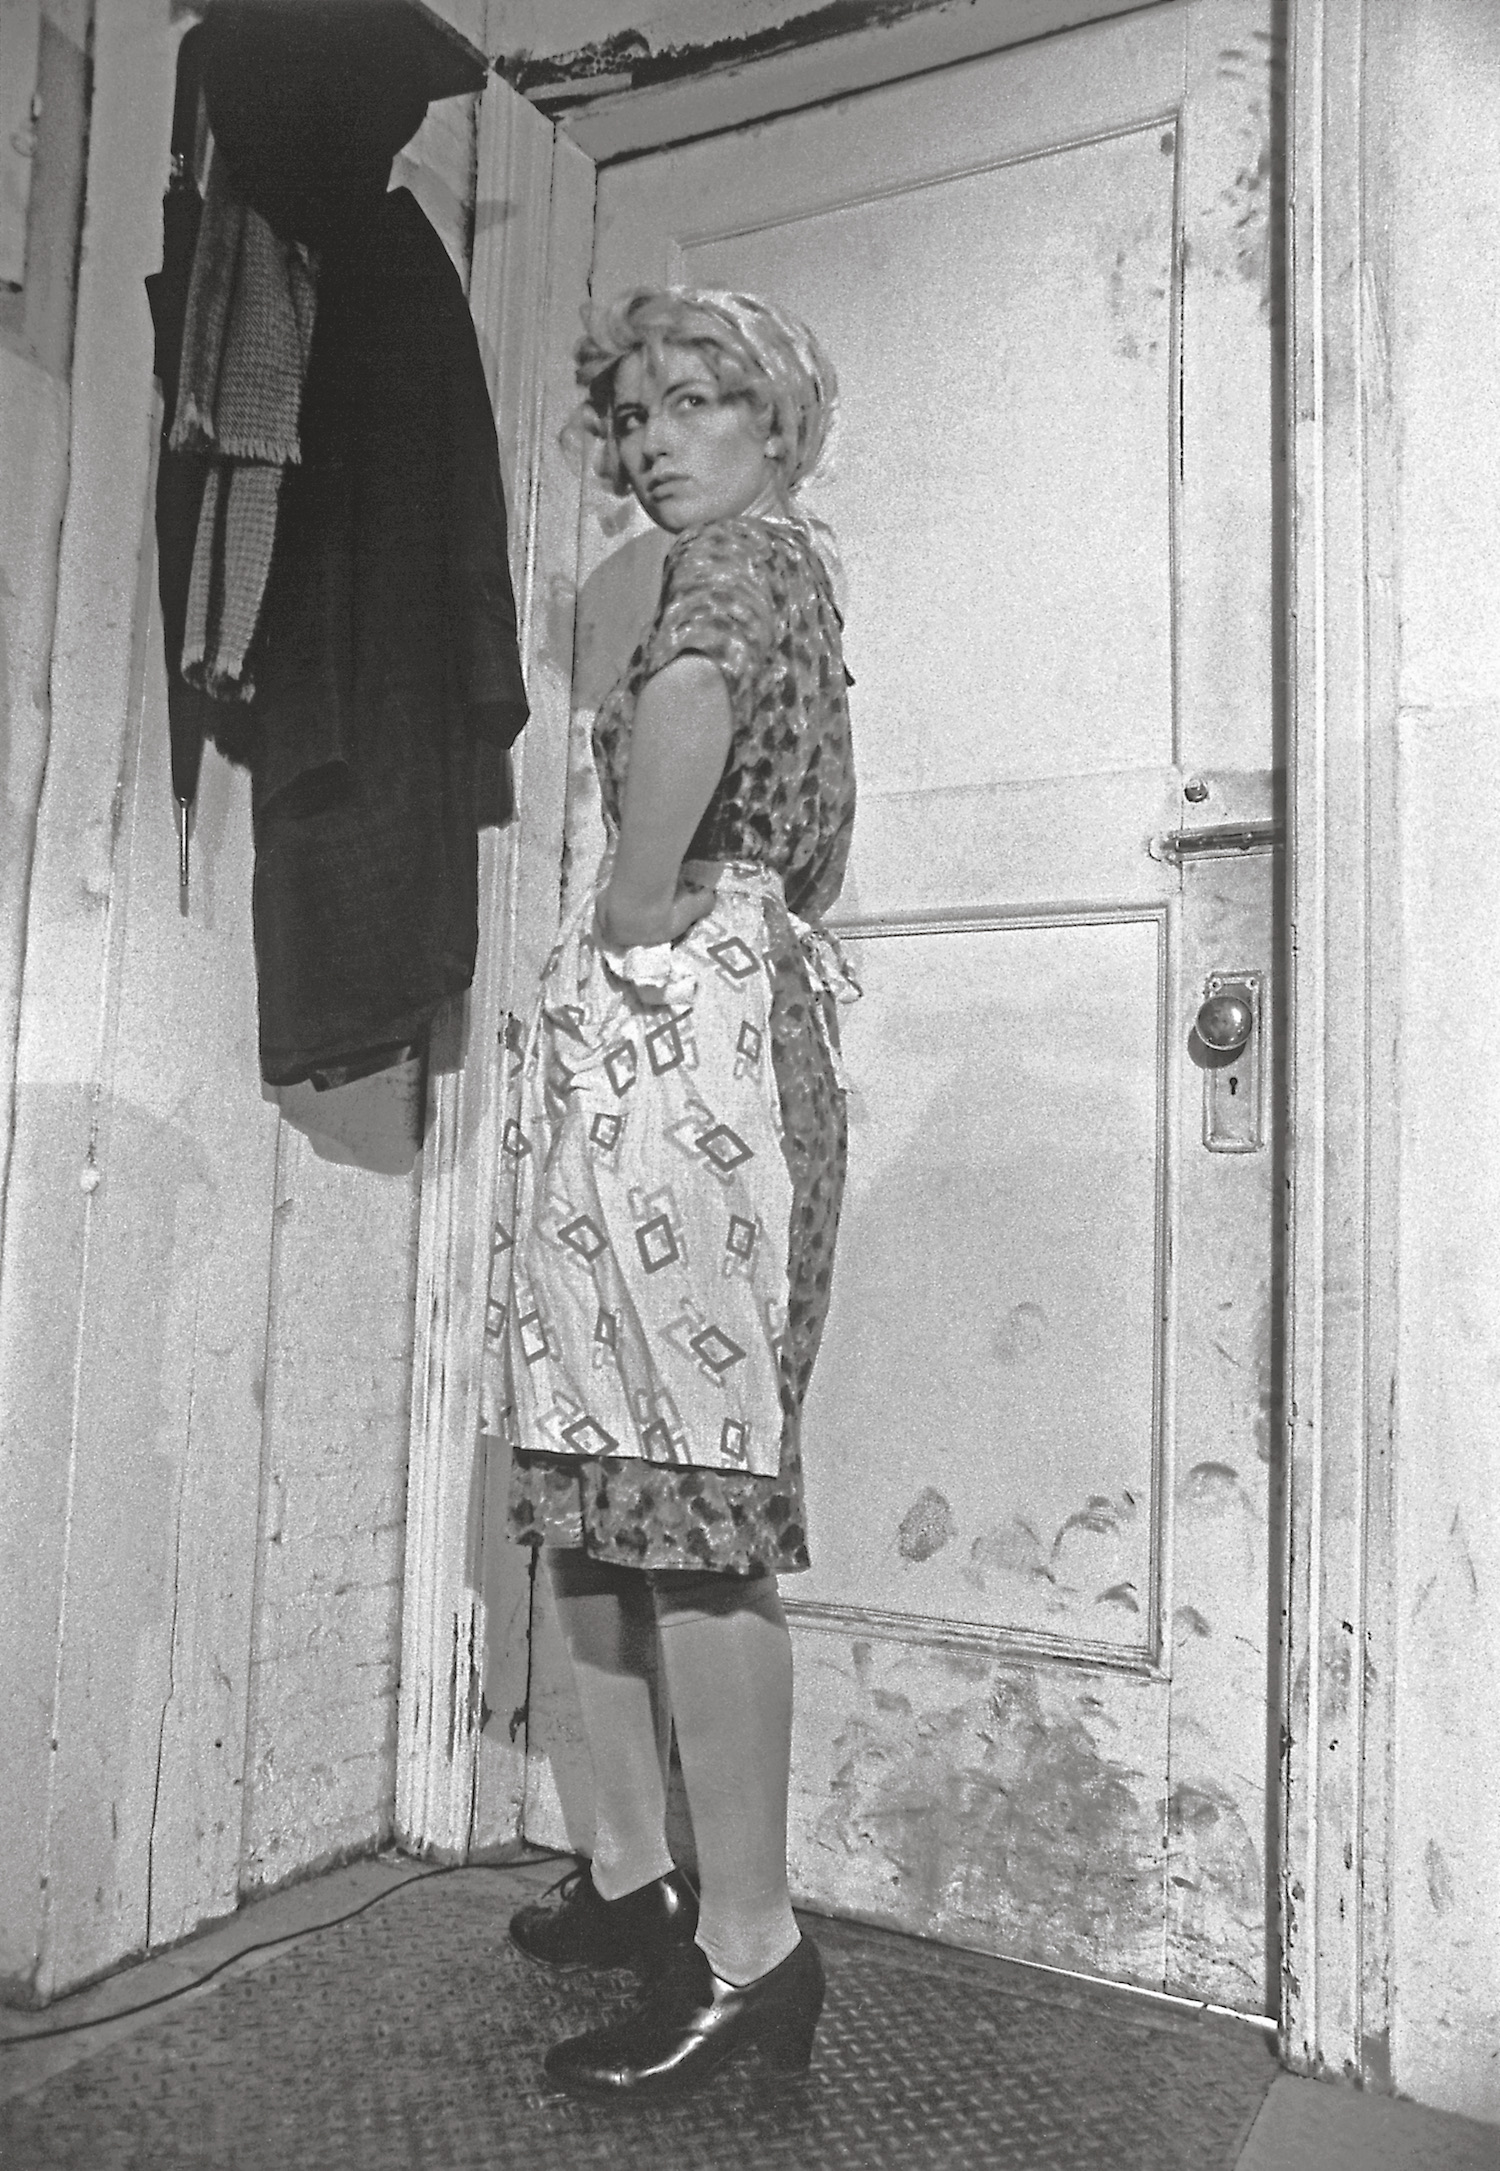 Cindy Sherman, Untitled Film Still #35,1979. Courtesy of the artist and Metro Pictures, New York.